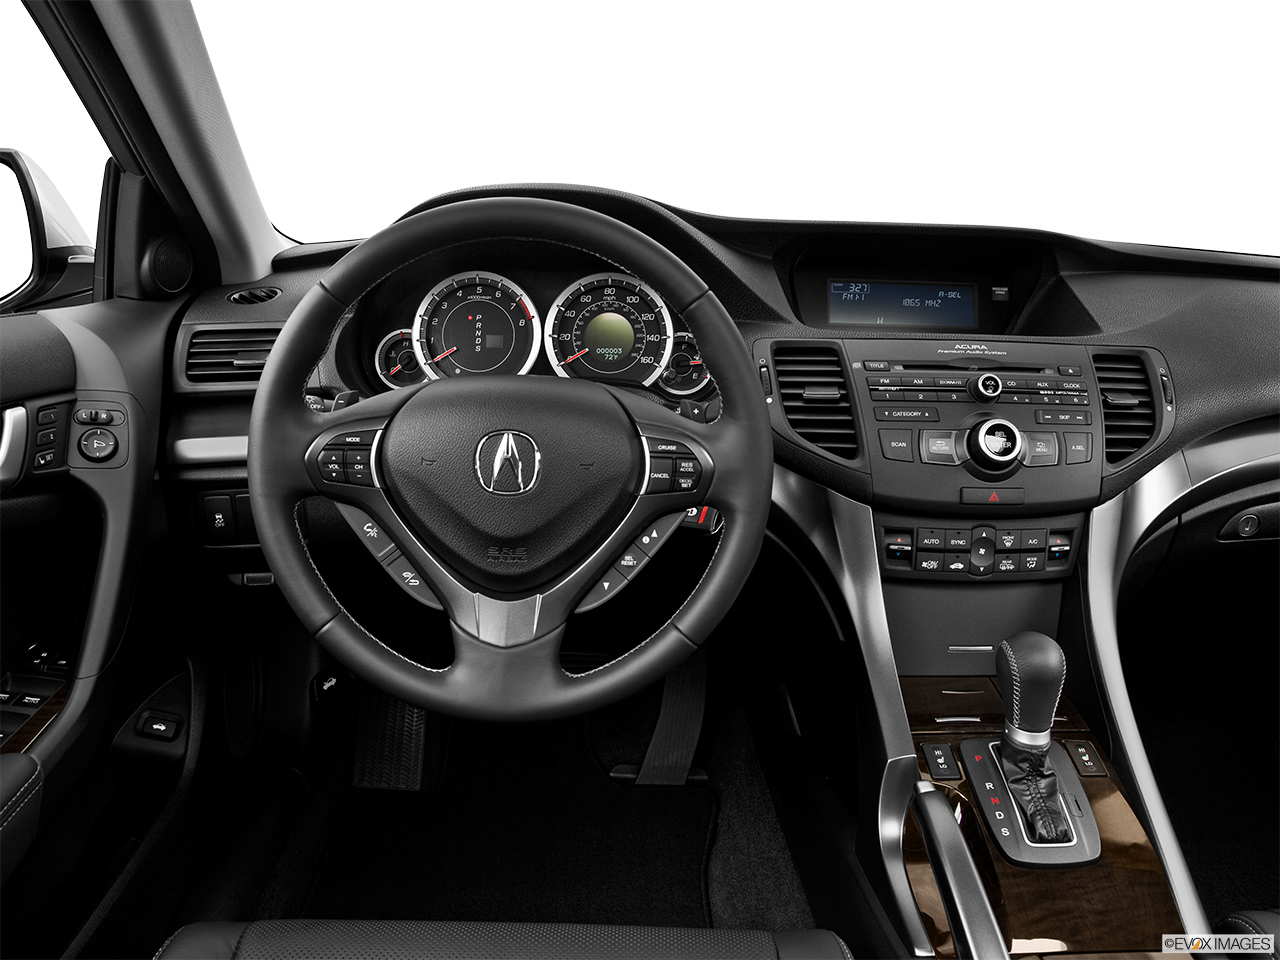 2013 Acura TSX 5-speed Automatic Steering wheel/Center Console. 